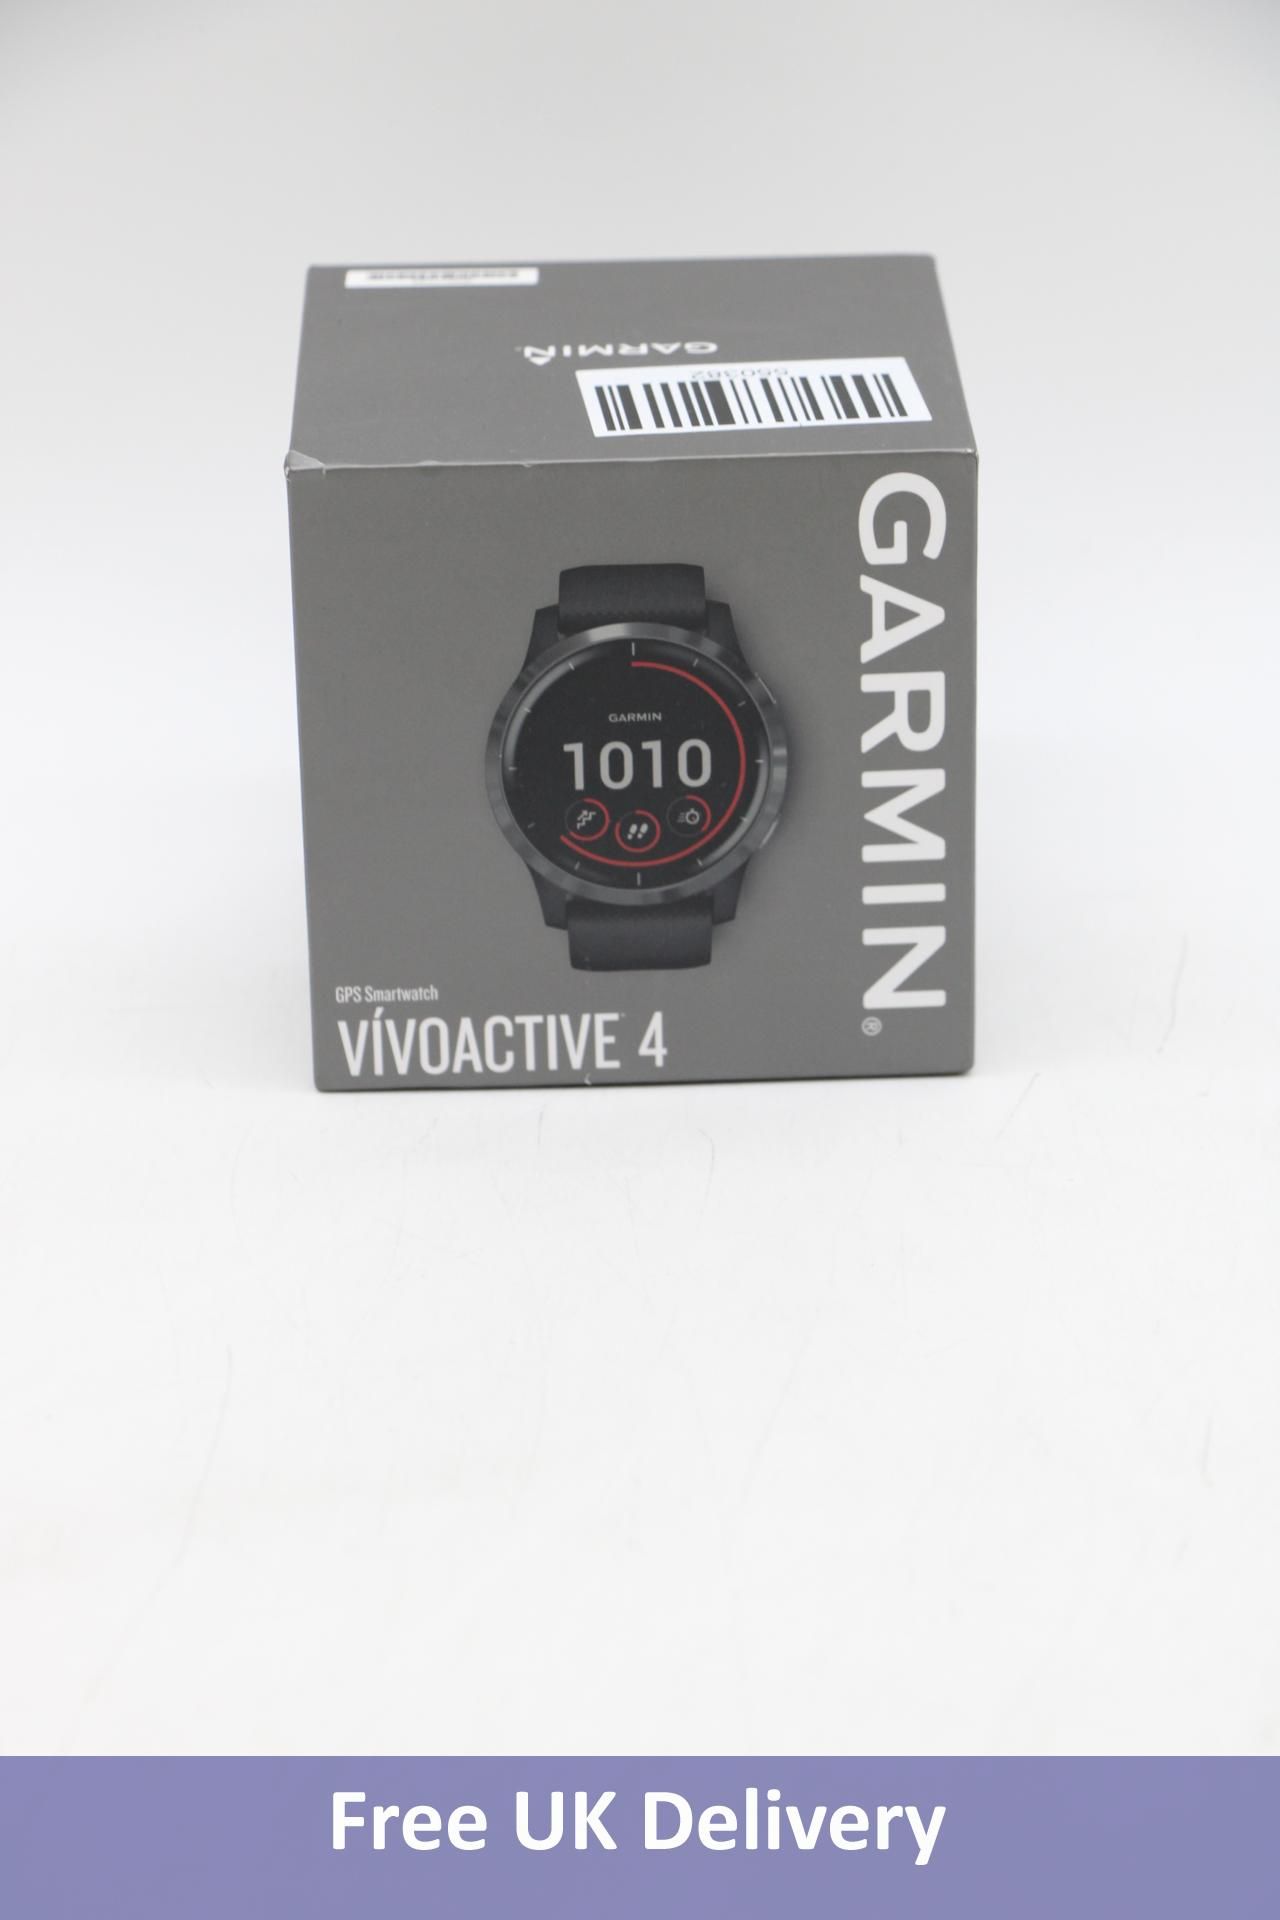 Garmin Vivoactive 4 Watch. Used, No Straps or Accessories & Not Tested